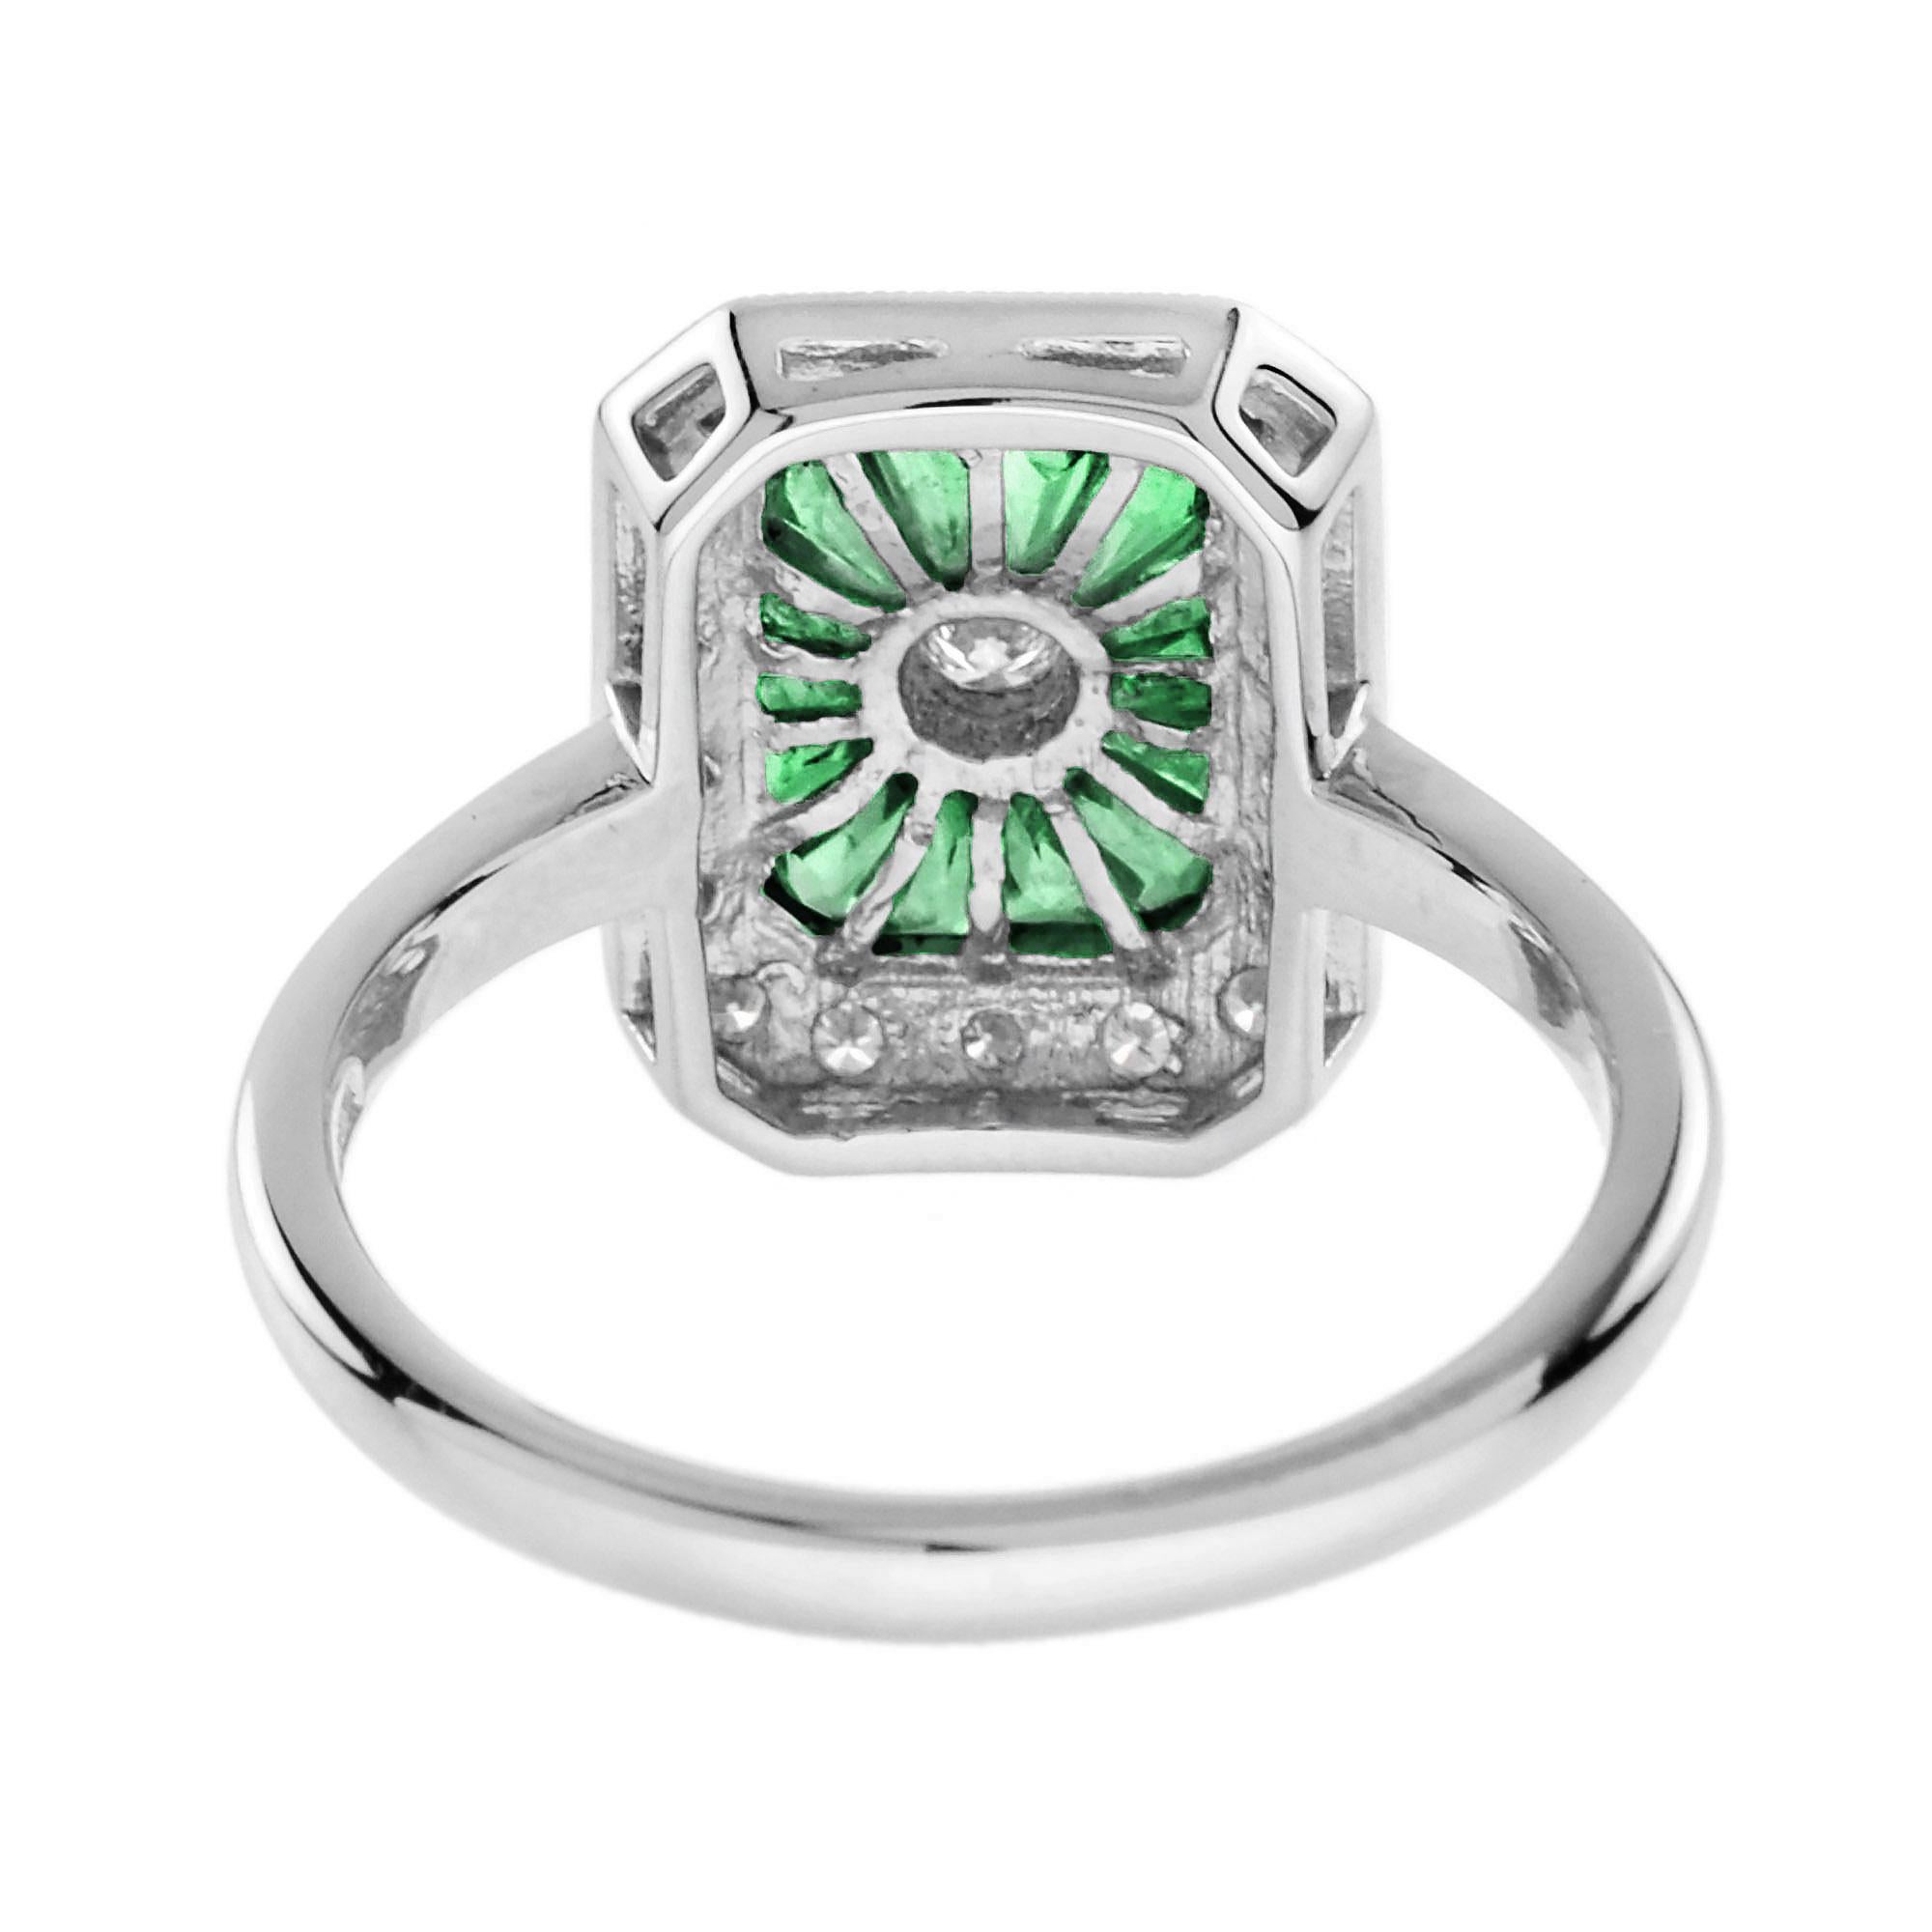 For Sale:  Diamond and Emerald Halo Art Deco Style Engagement Ring in 14K White Gold 5